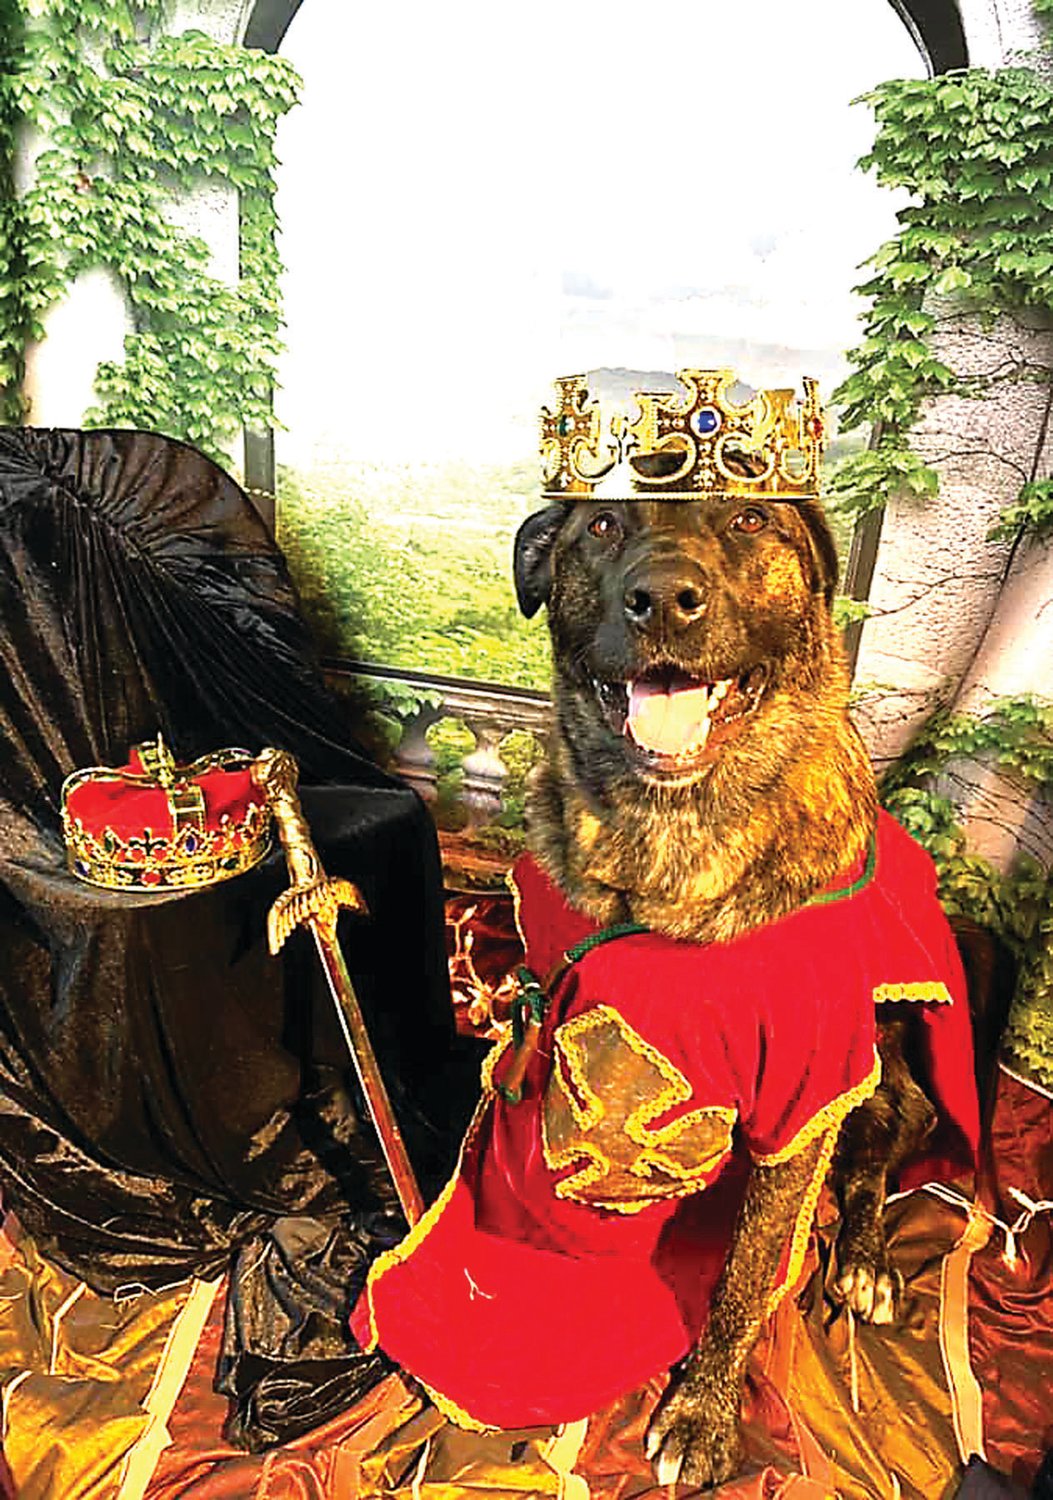 A knight at the dog prom poses for an official portrait.